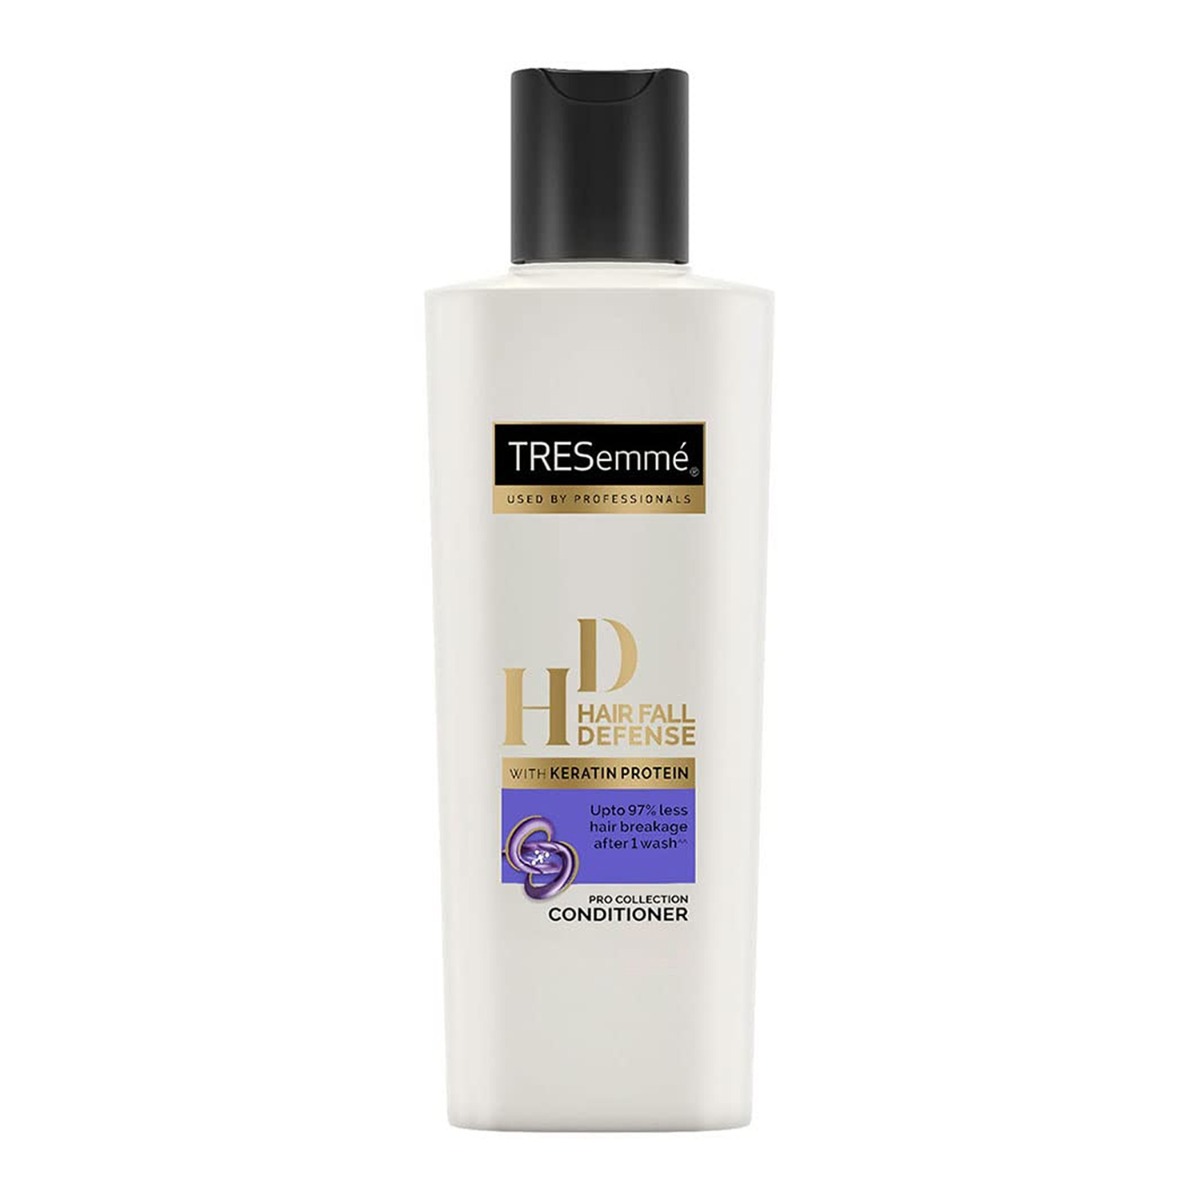 TRESemme Hair Fall Defense Conditioner, 80ml